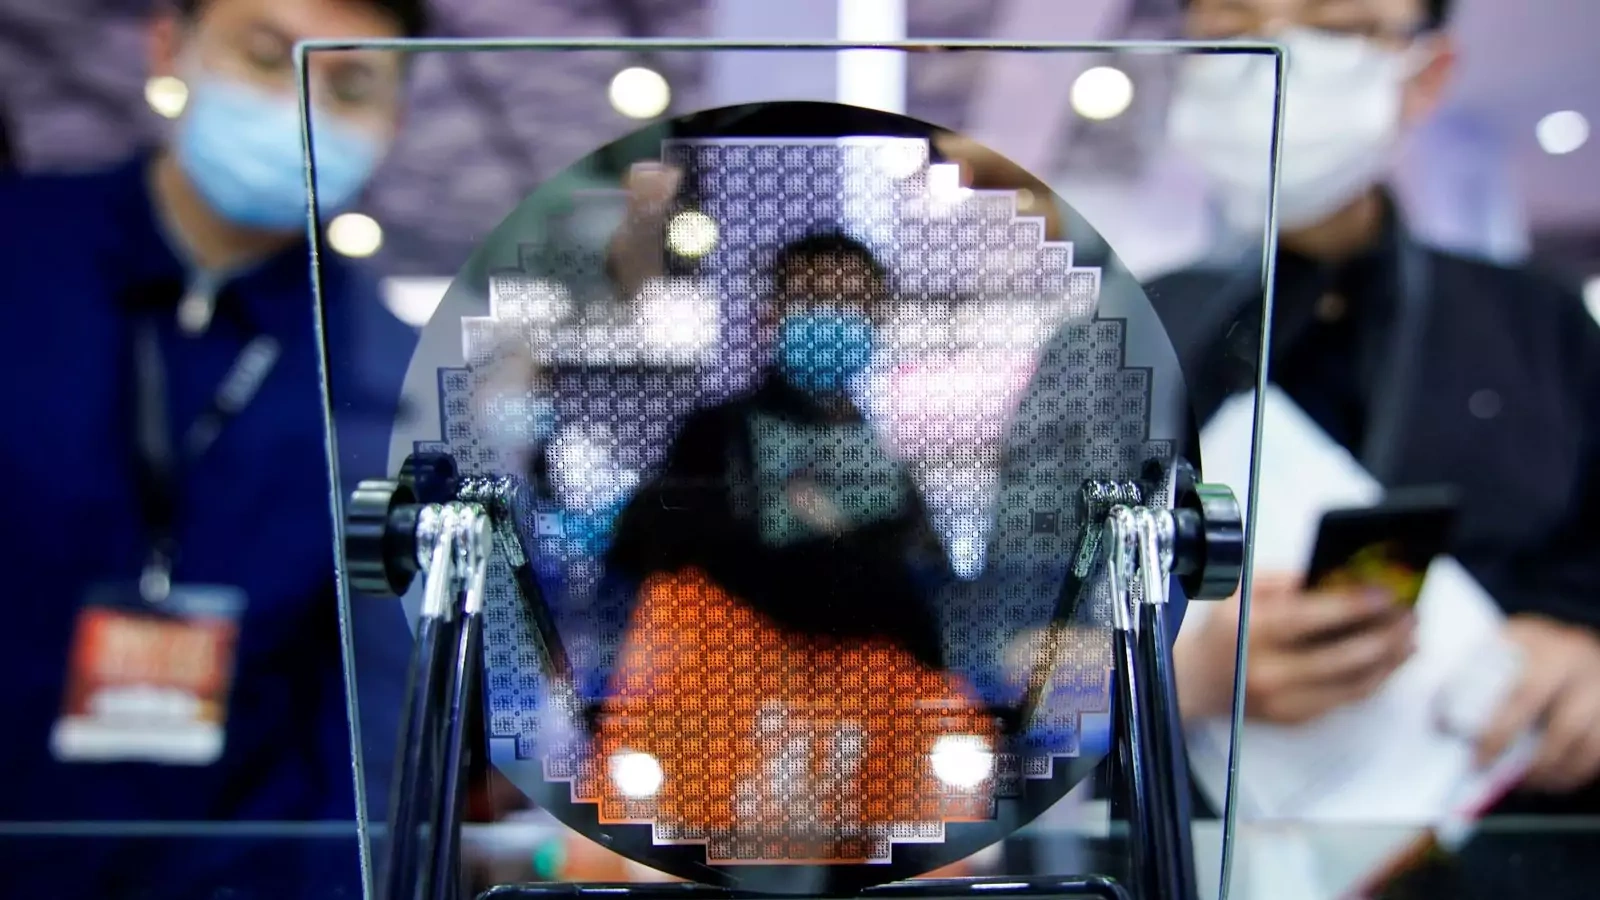 Visitors look at a display of a semiconductor device at Semicon China, a trade fair for semiconductor technology, in Shanghai, China.